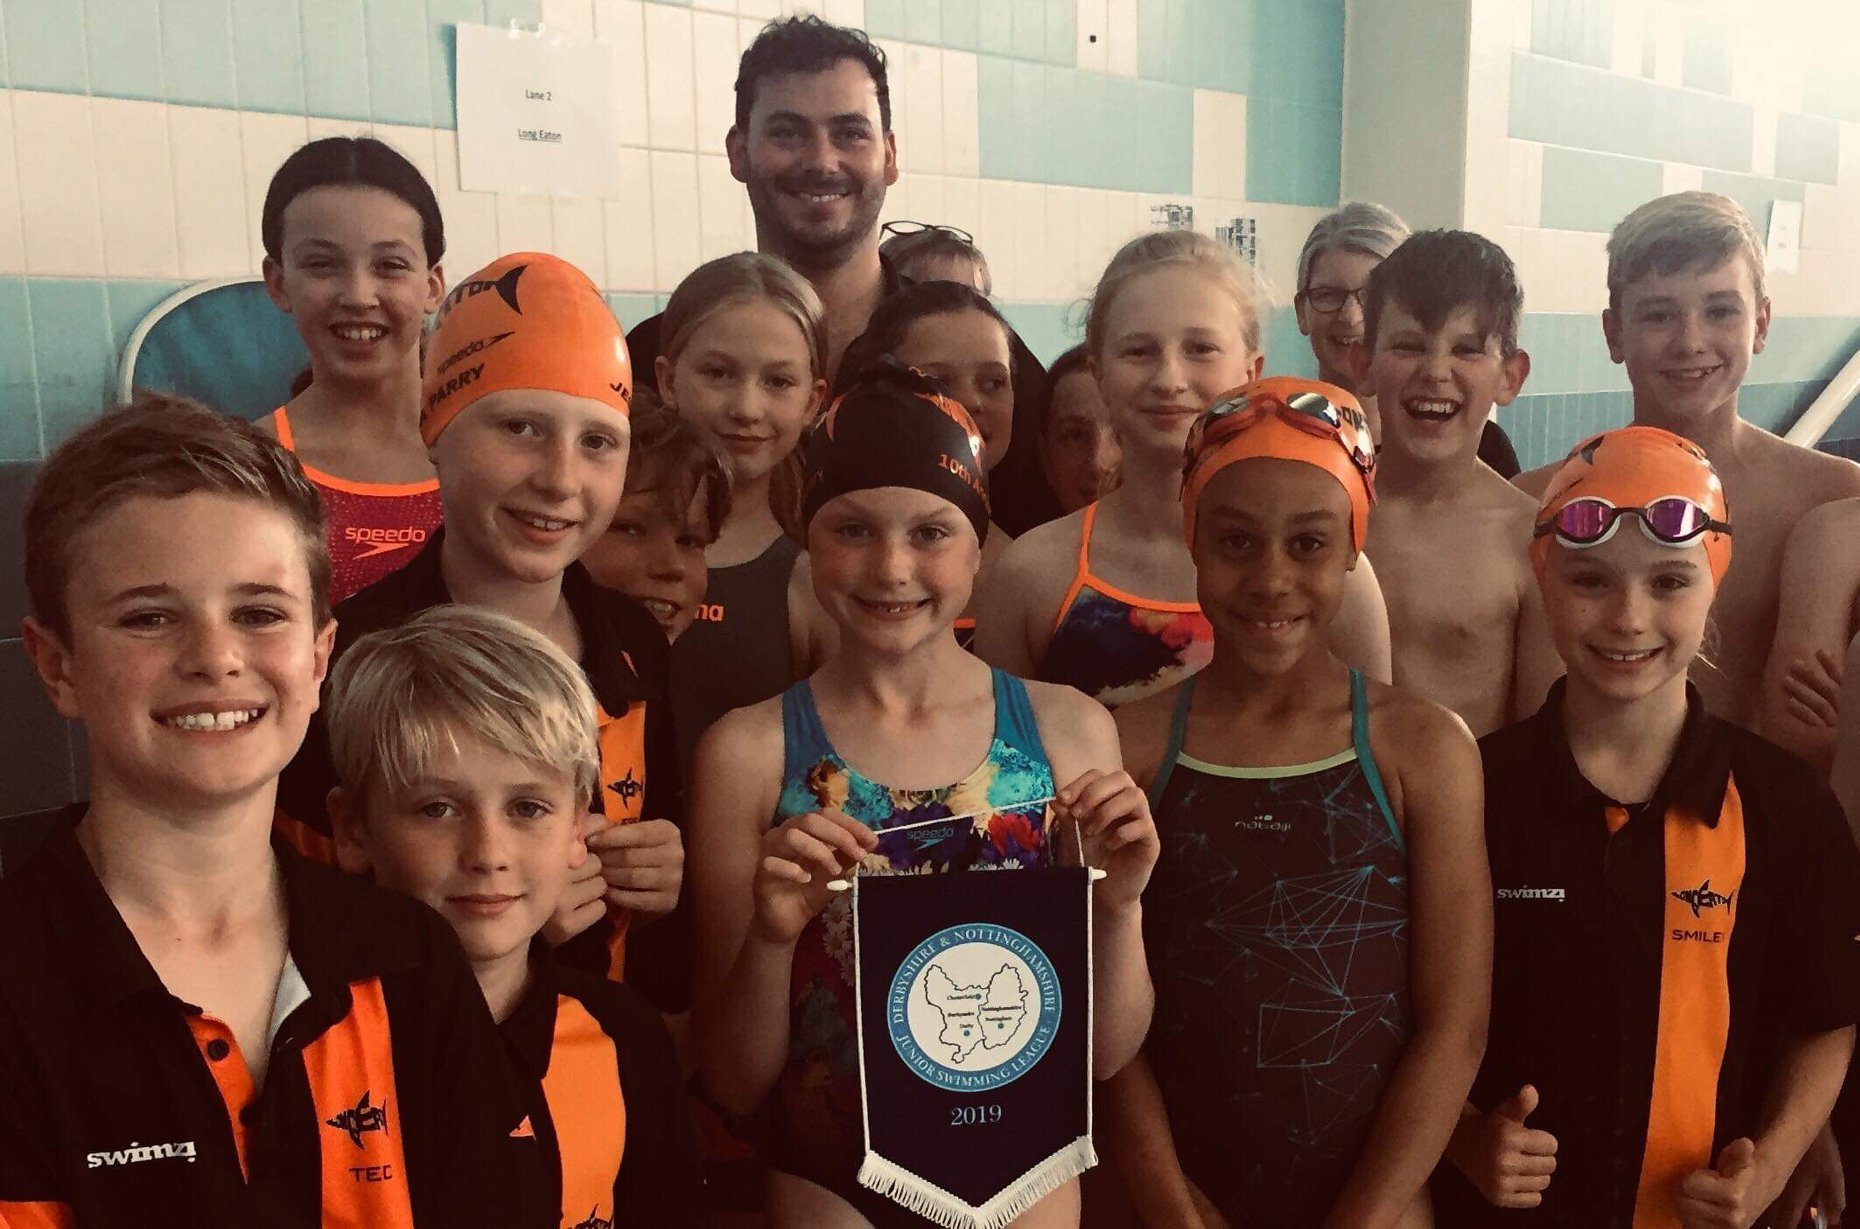 Long Eaton Swimming Club Covid Appeal - a Sports crowdfunding project ...